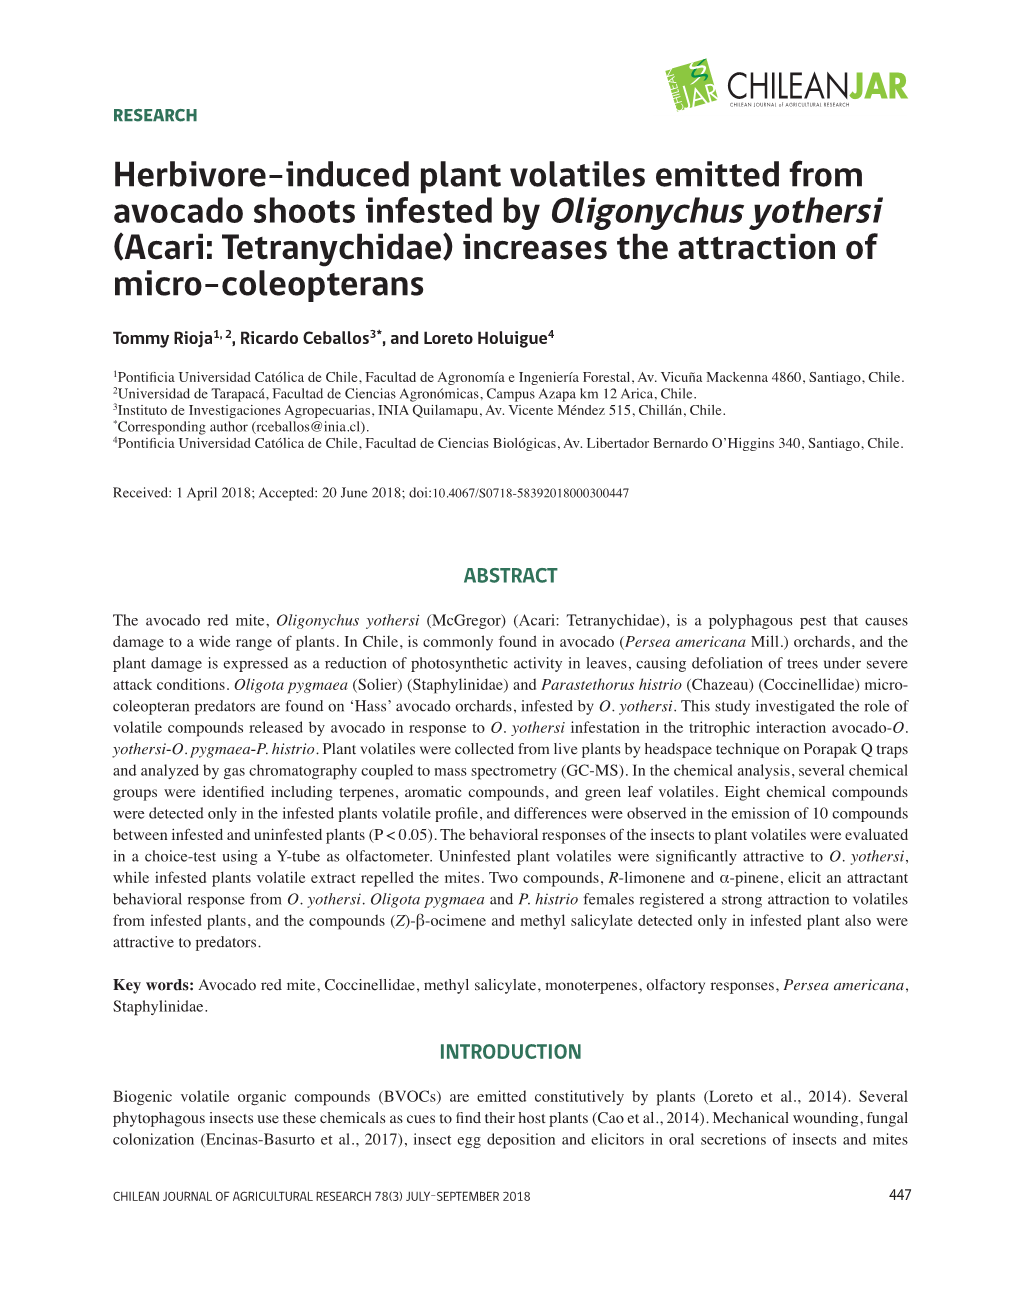 Herbivore-Induced Plant Volatiles Emitted from Avocado Shoots Infested by Oligonychus Yothersi (Acari: Tetranychidae) Increases the Attraction of Micro-Coleopterans